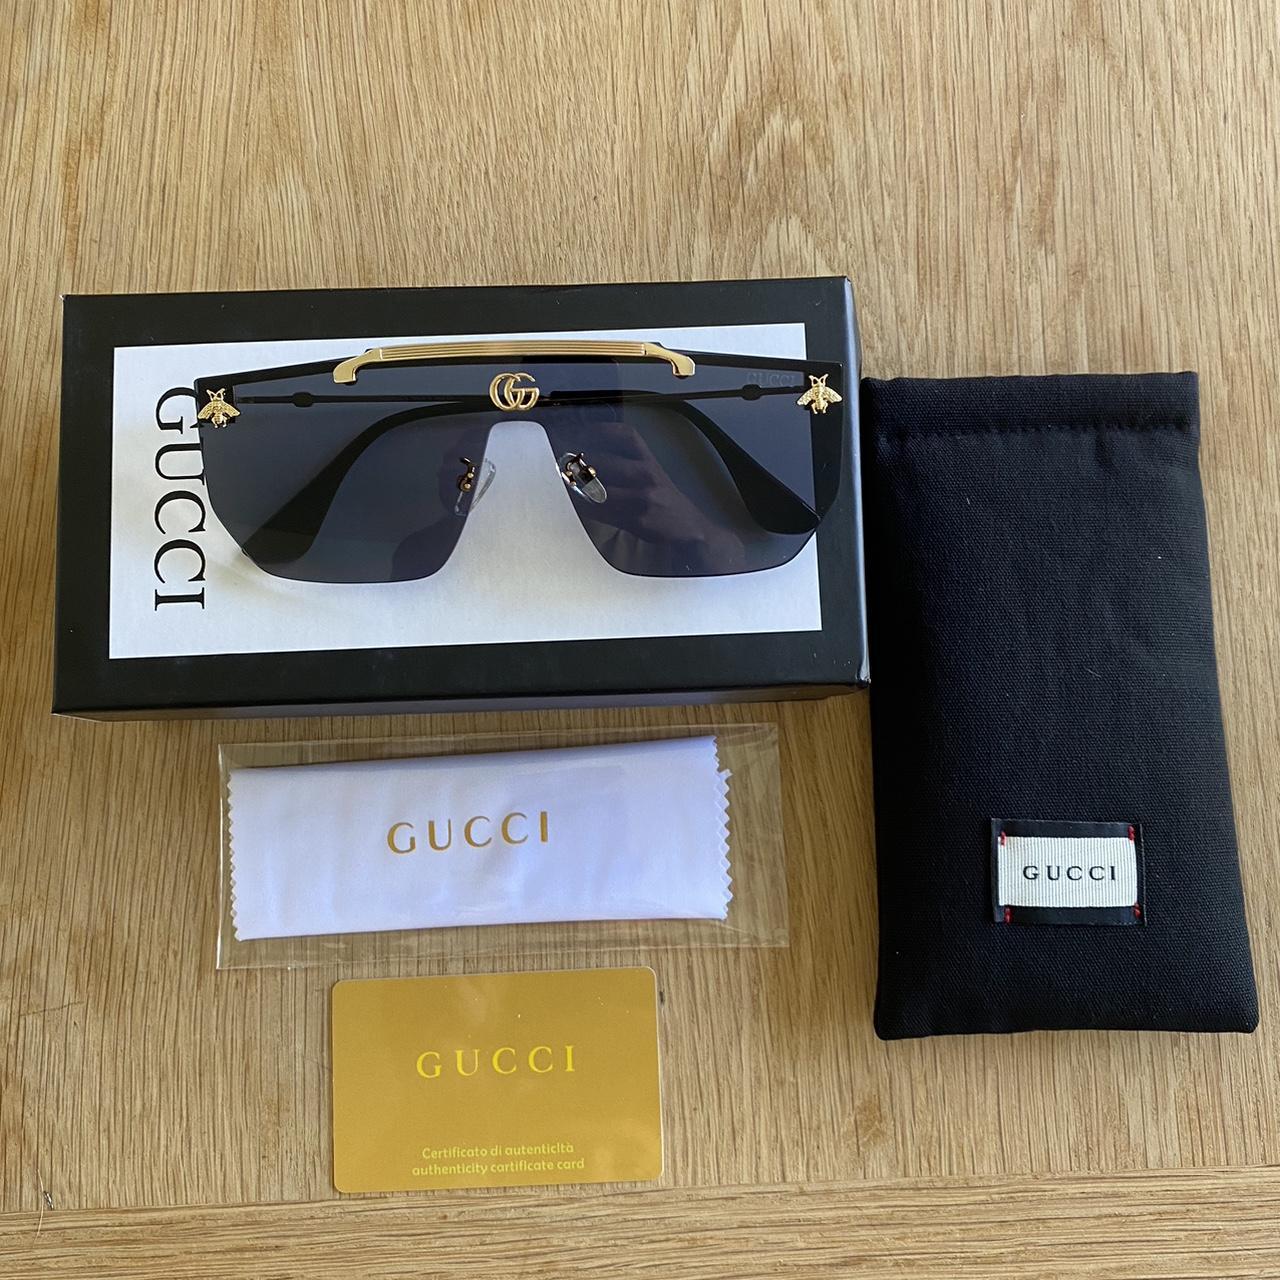 Gucci Sunglasses Gold and Black. Comes with... - Depop